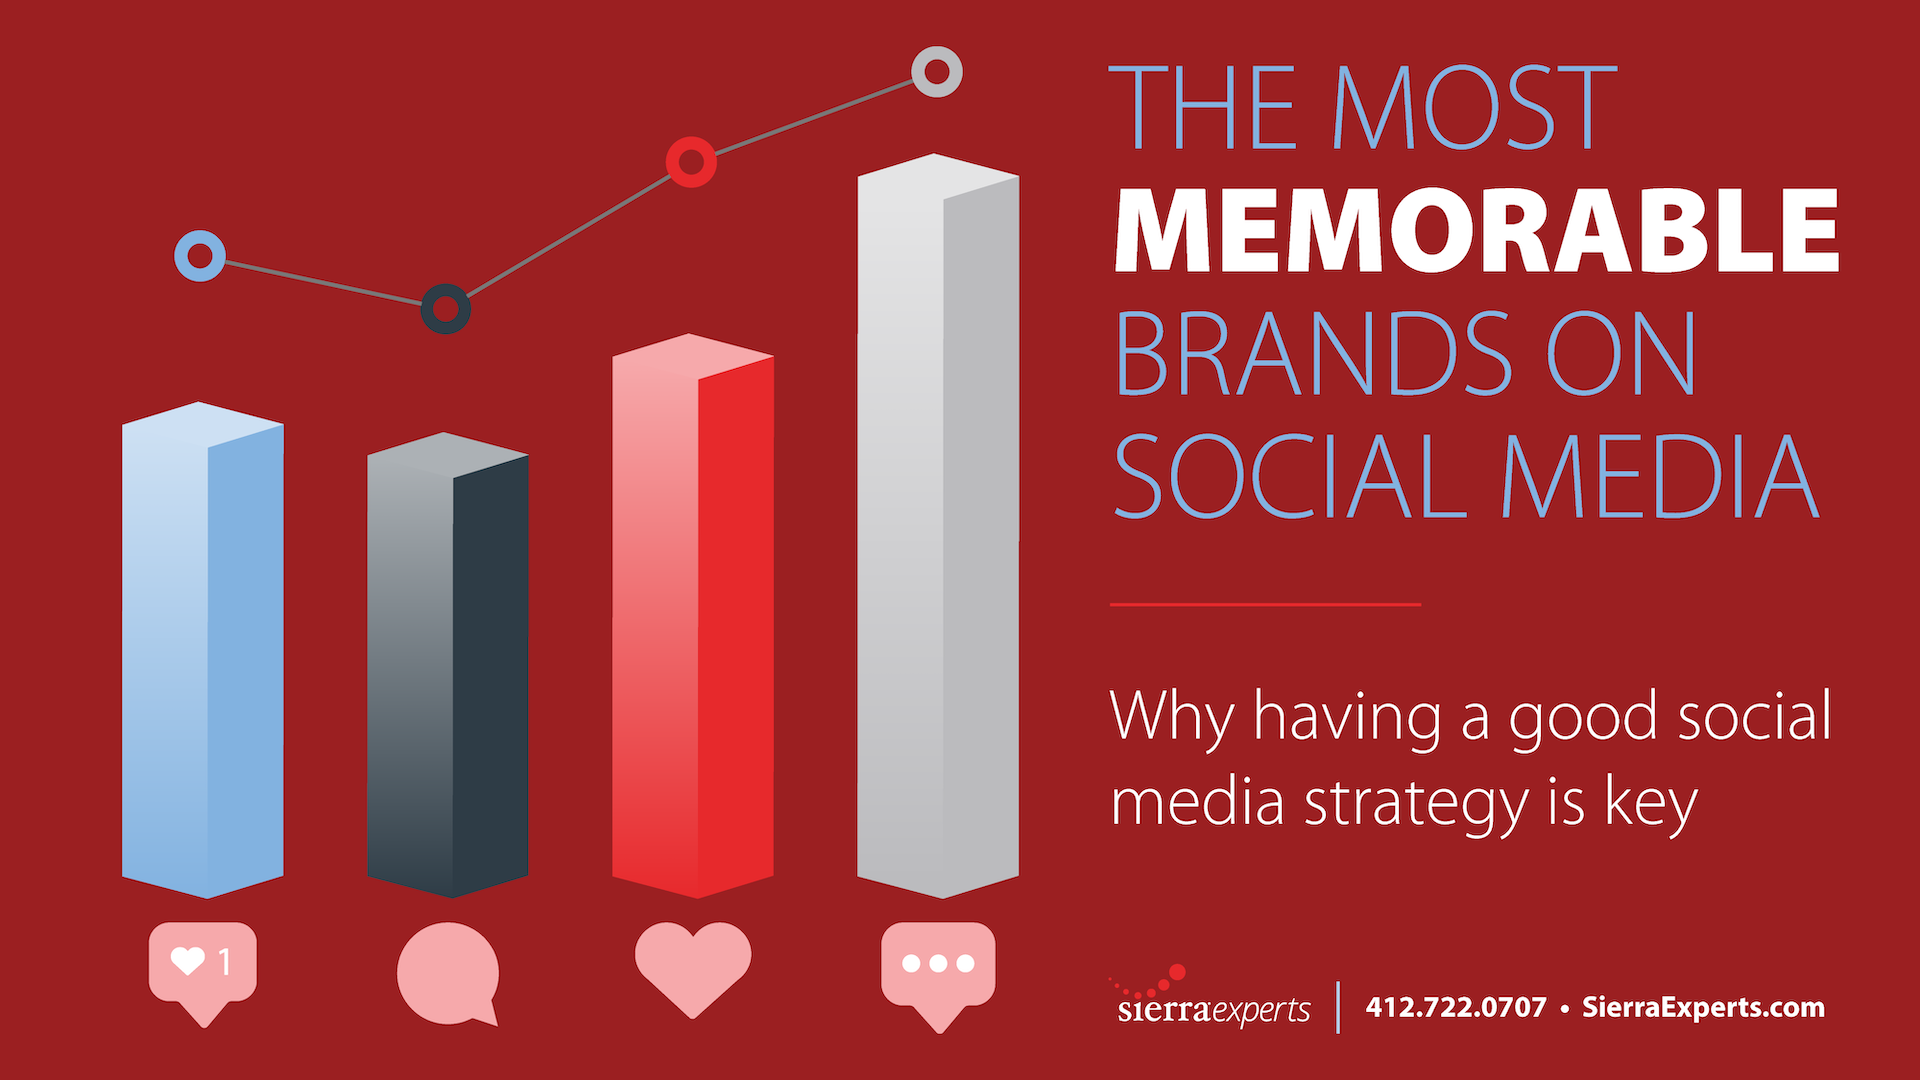 The Most Memorable Brands on Social and the Importance of a Good Social Media Strategy.